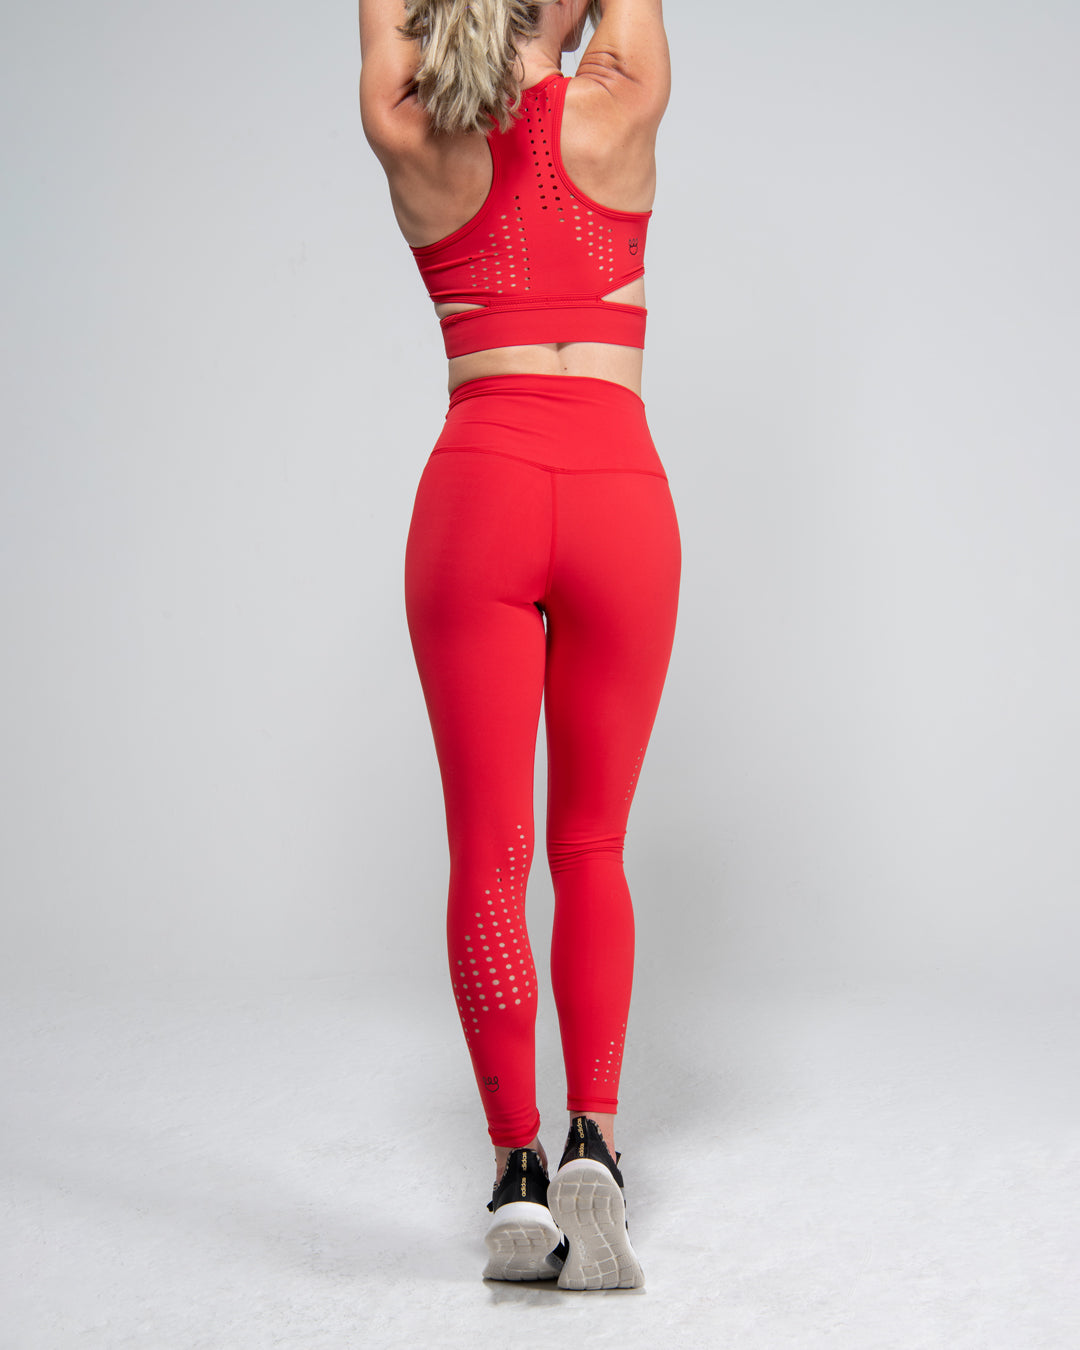 kadyluxe-womens-activewear-legging-red-laser-punch-out-holes-back